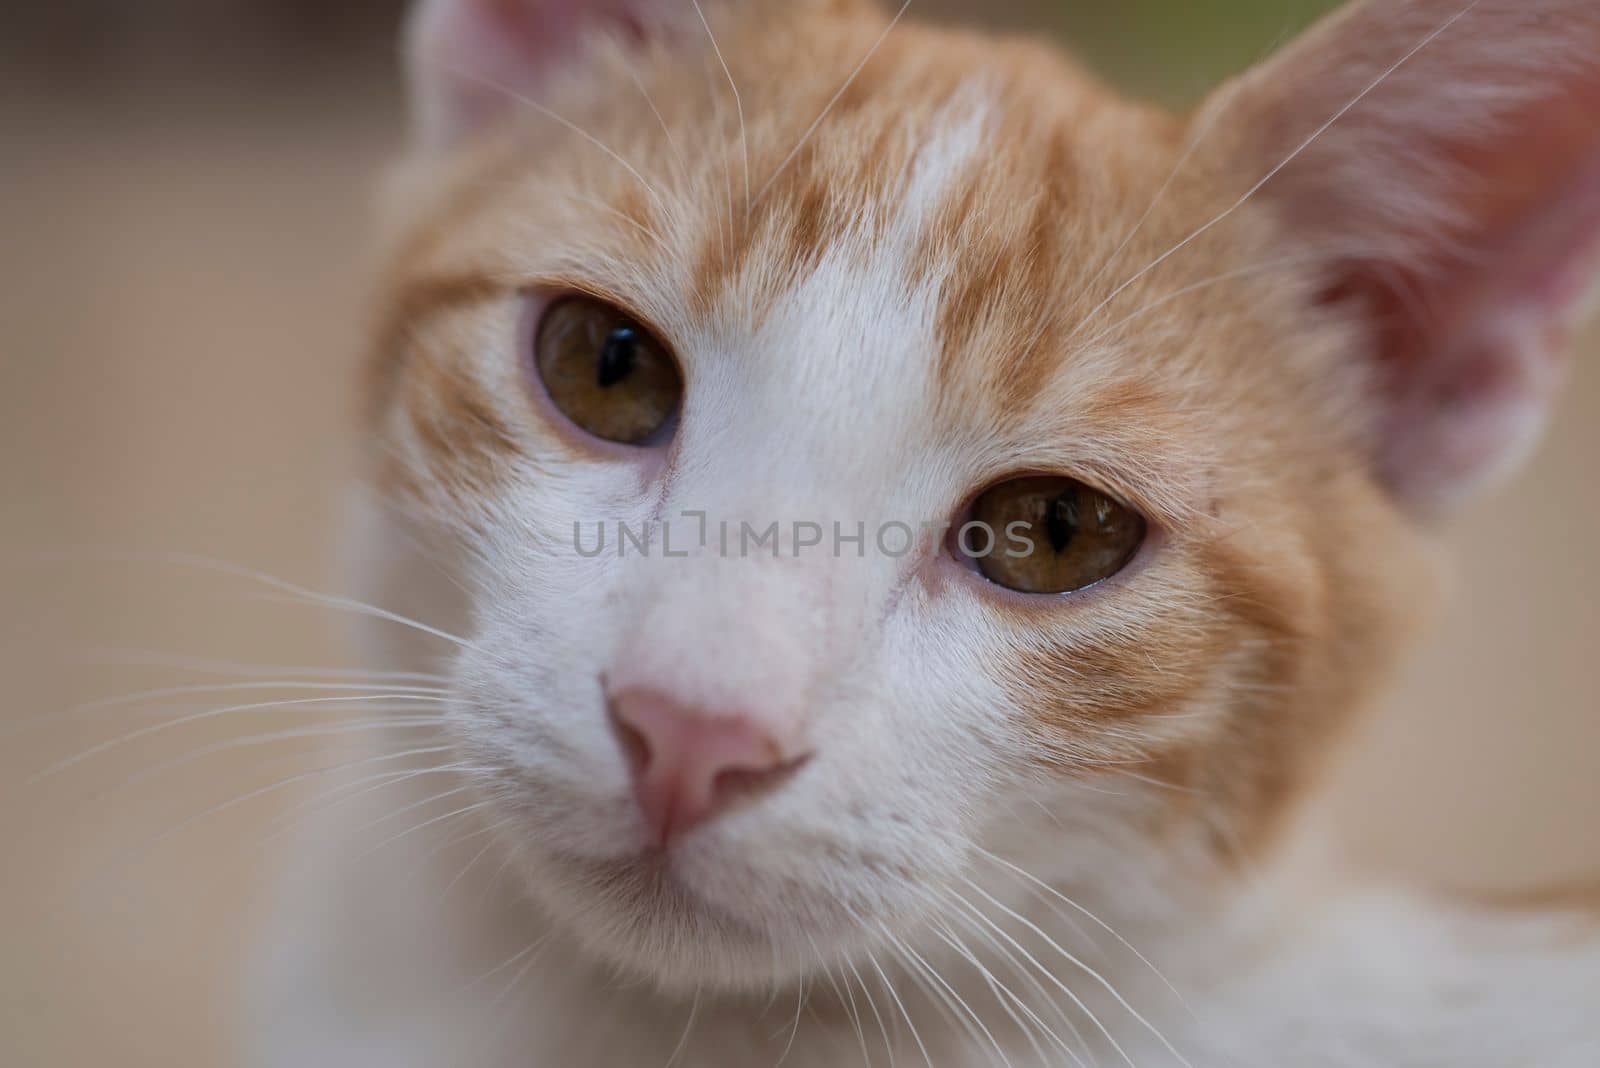 Closeup of cute domestic house cat face with whiskers by paulvinten